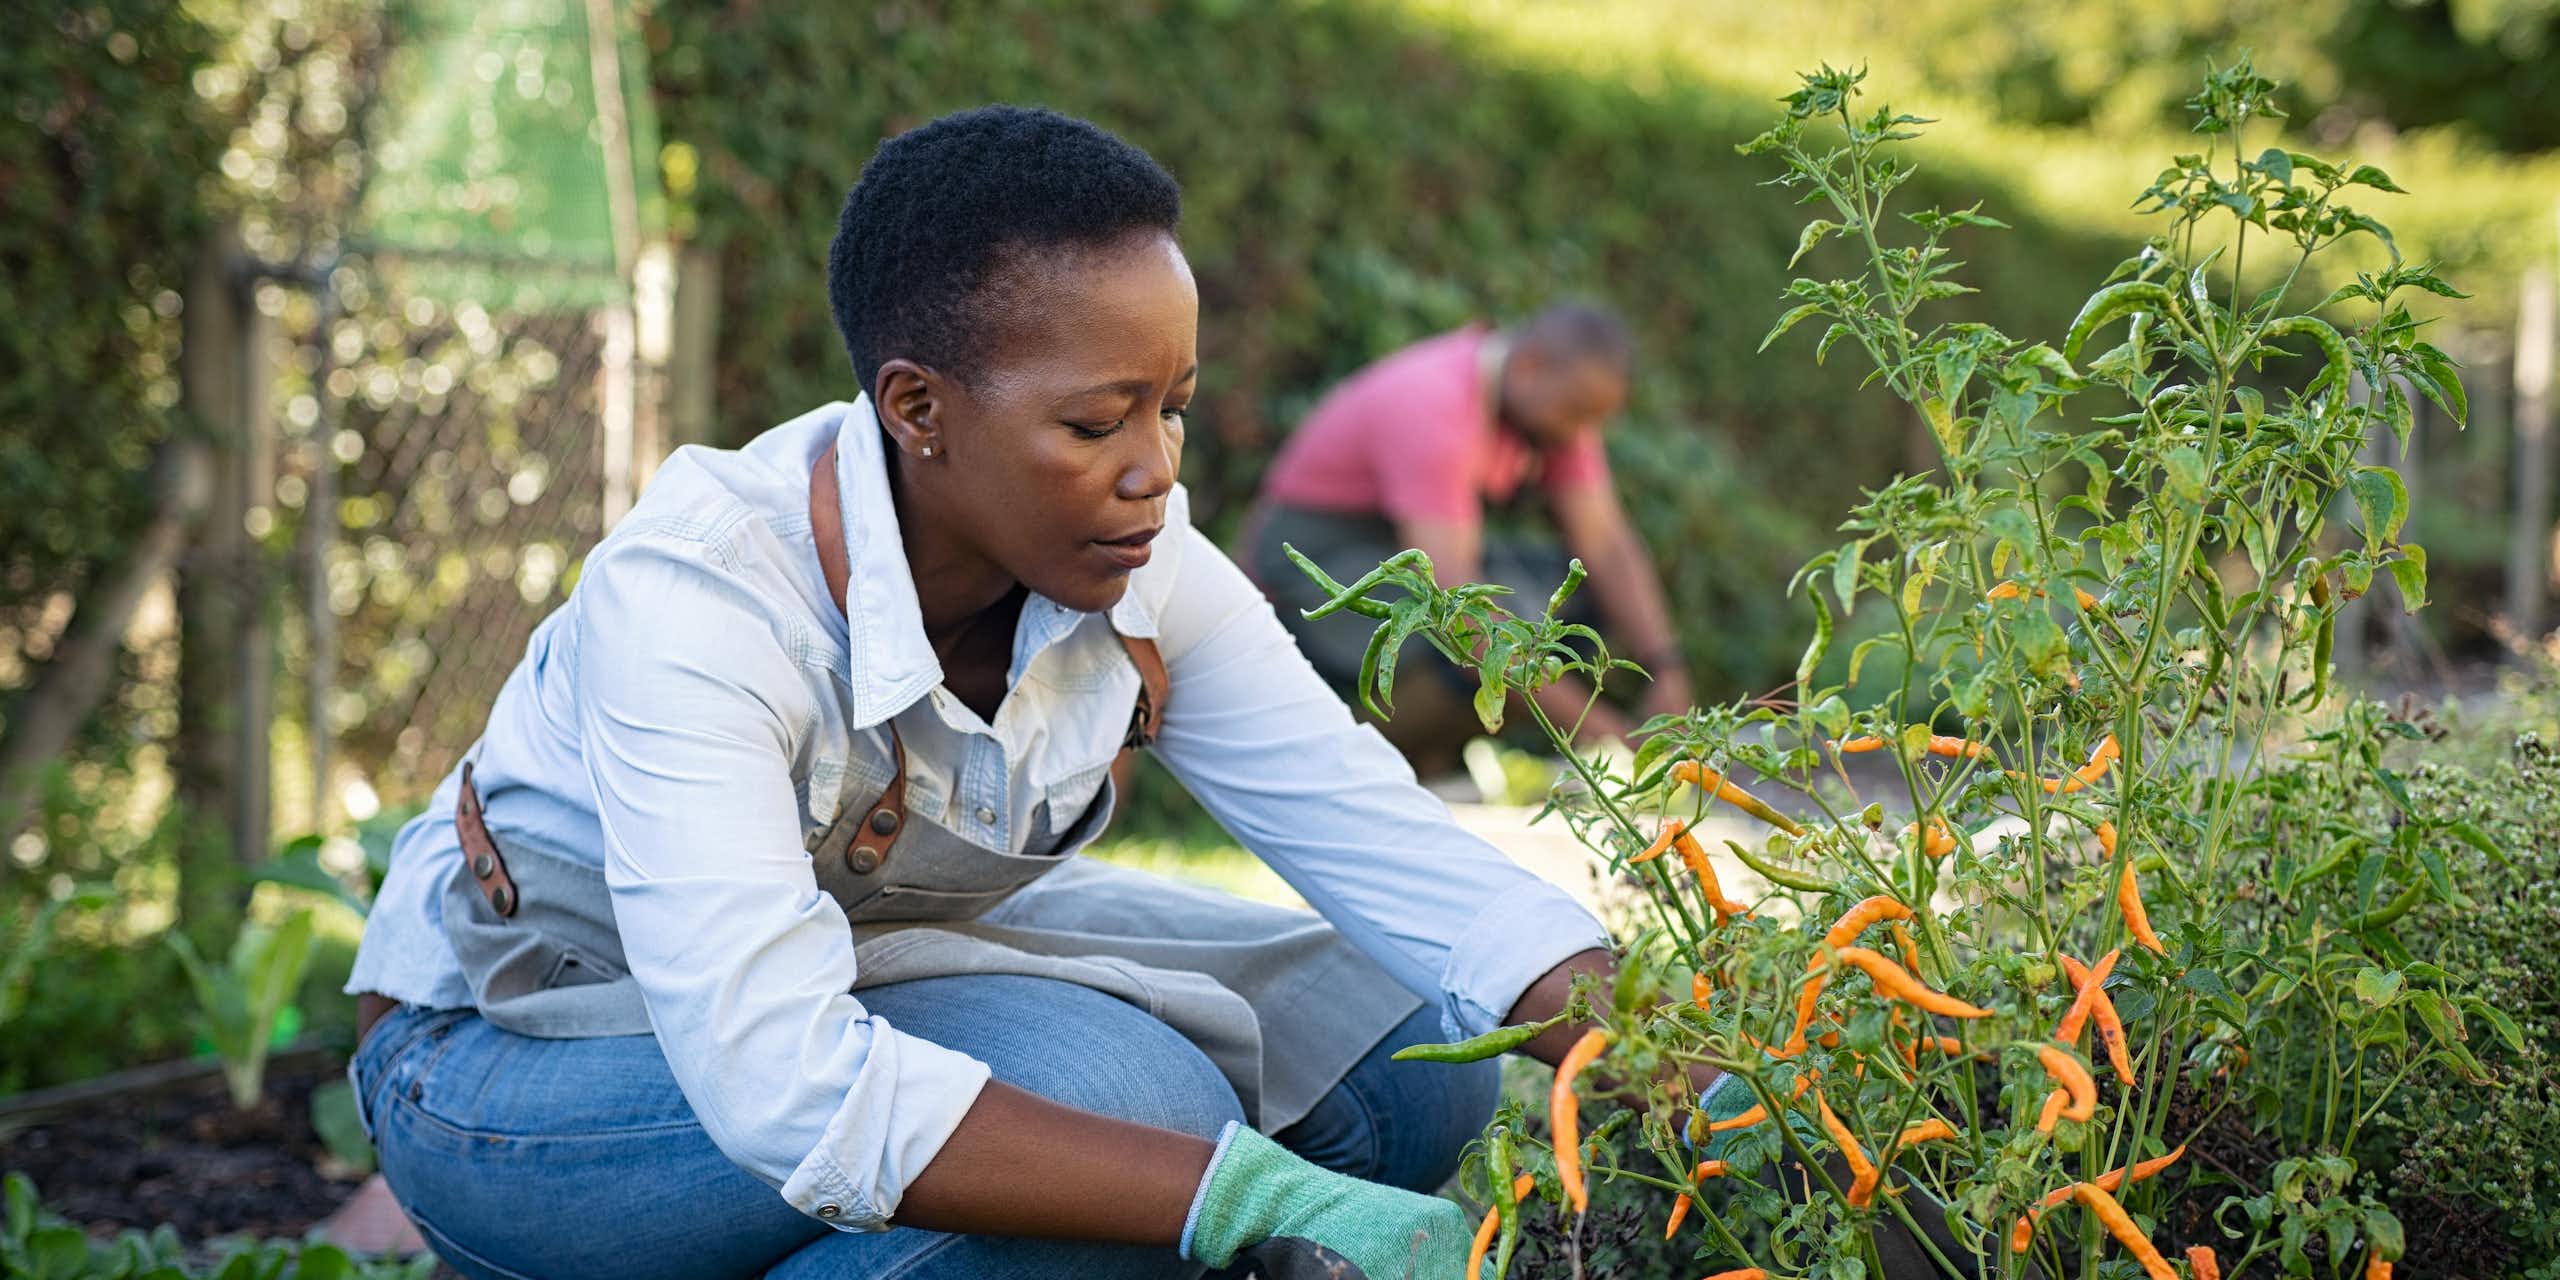 A Black woman wearing denim, gloves and an apron, crouches down by a green and orange plant. 